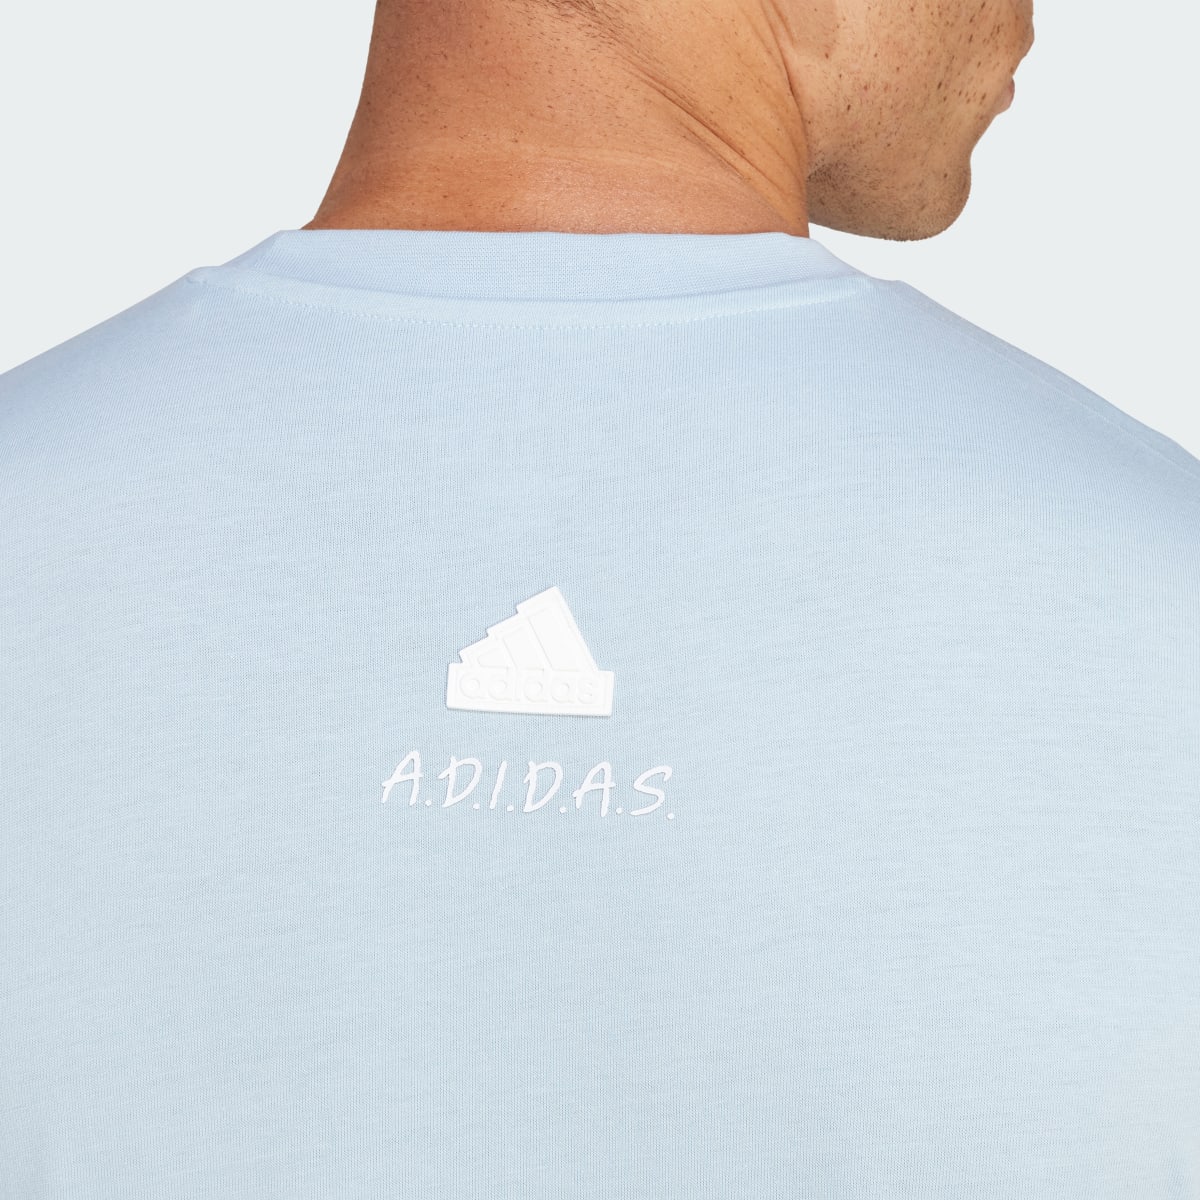 Adidas All Day I Dream About... Graphic T-Shirt. 7